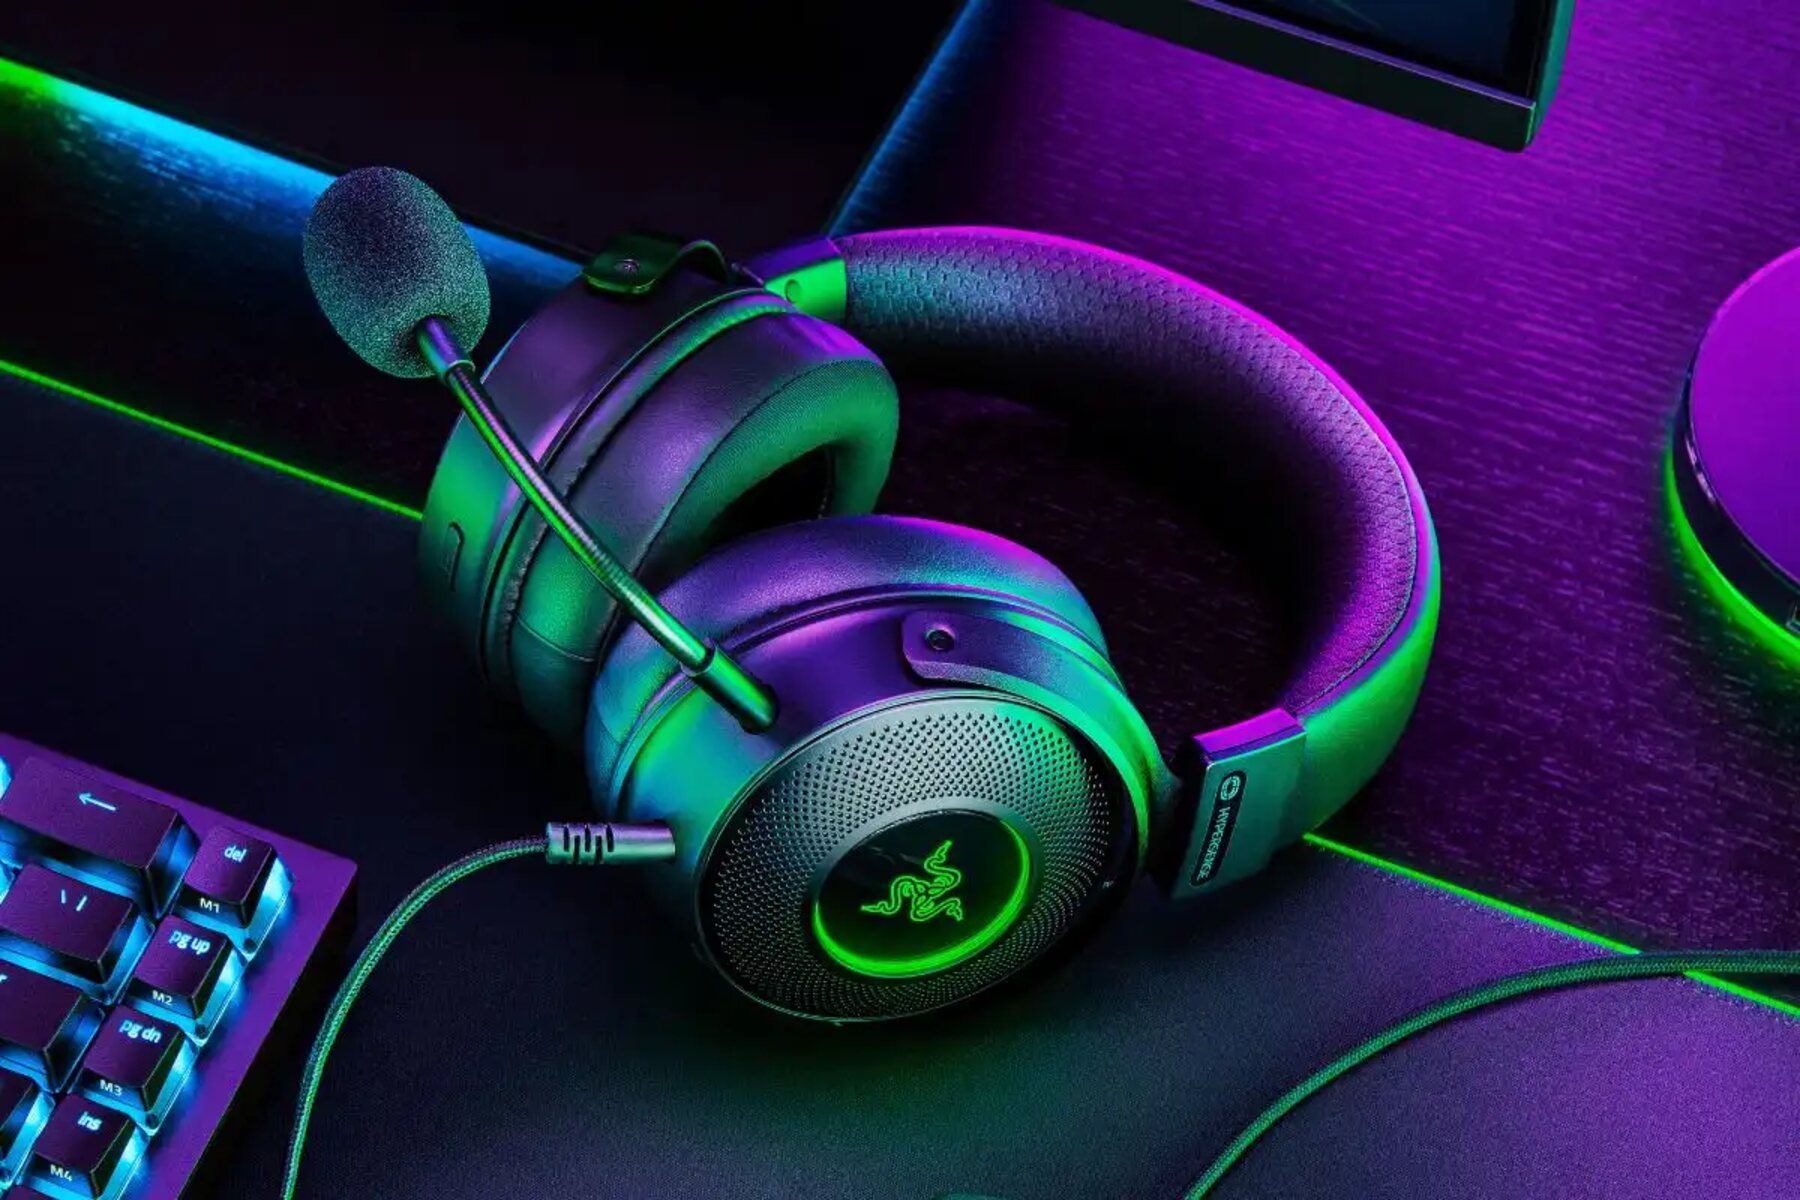 How To Make Razer Gaming Headset Work With PS4 Controller